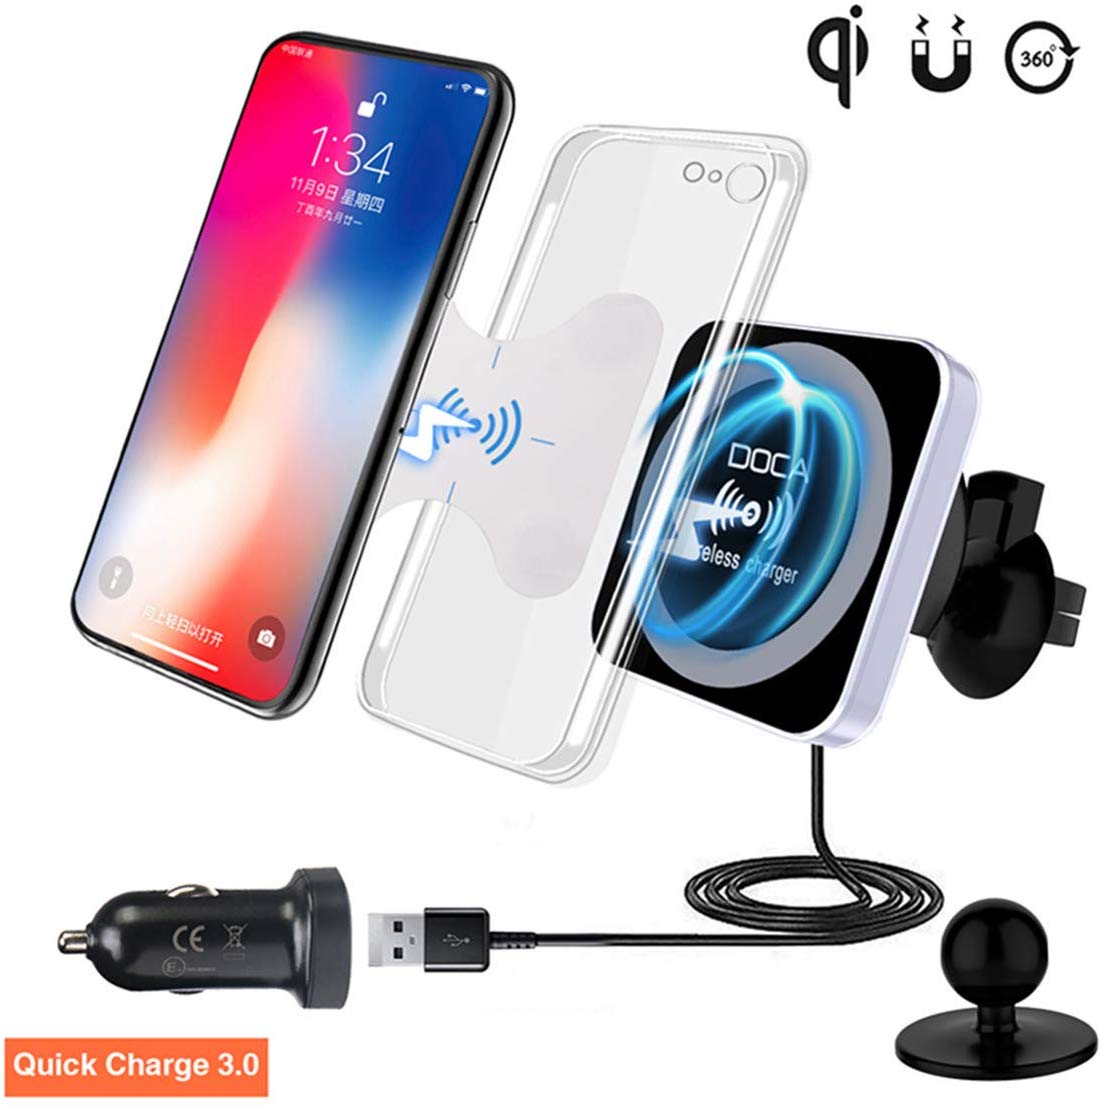 QI Wireless Car Charger with QC3.0 USB Charger, DOCA Magnetic Wireless Car Charger Mount Air Vent Ca